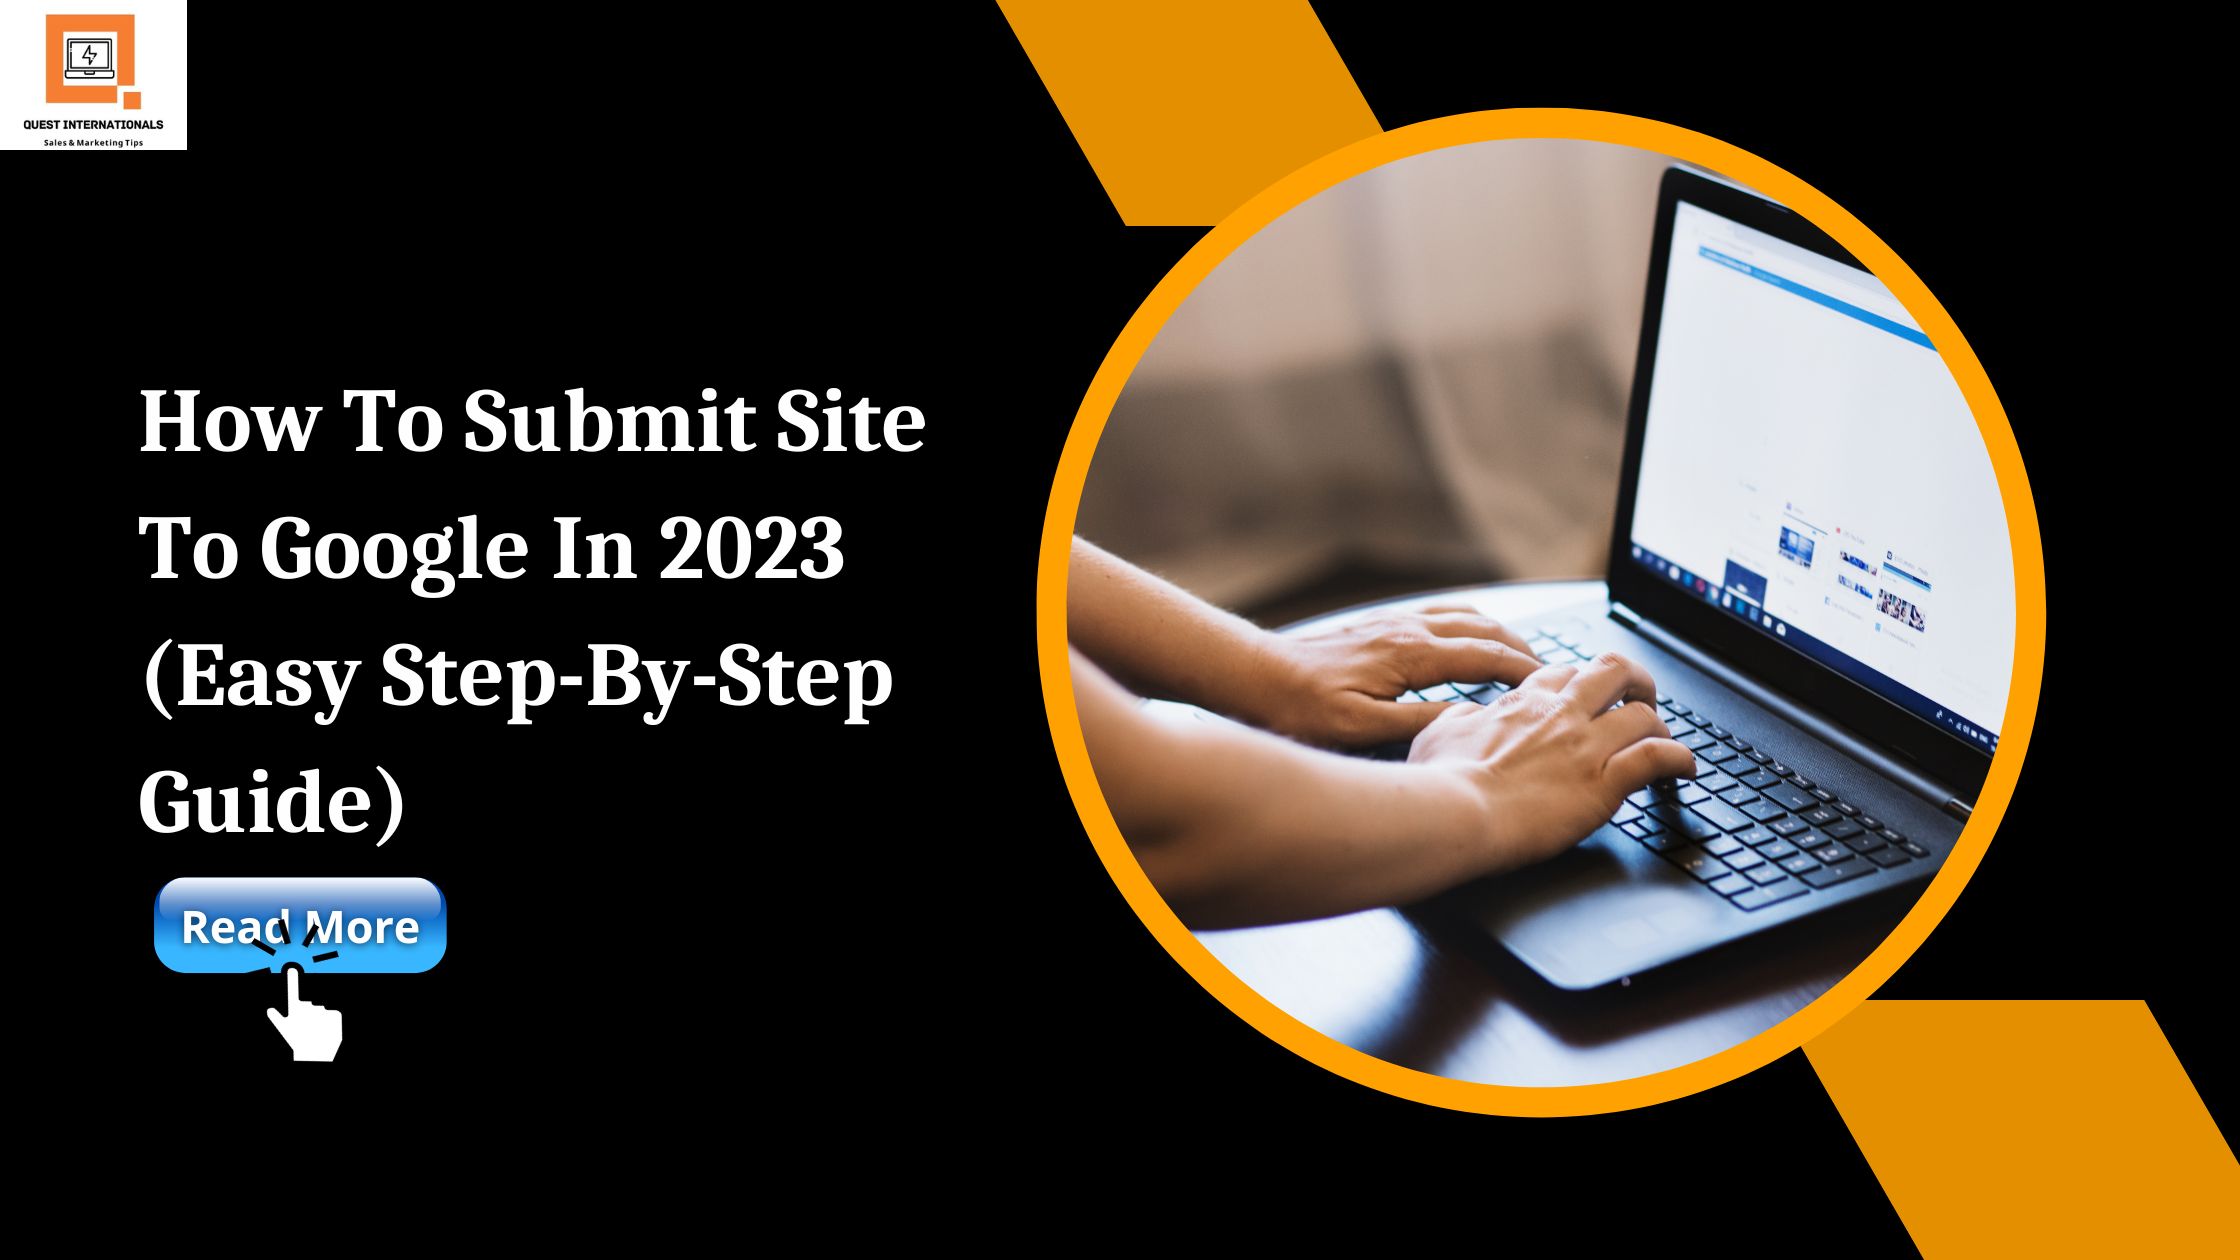 You are currently viewing How To Submit Your Site To Google In 2023 (Easy Step-By-Step Guide)